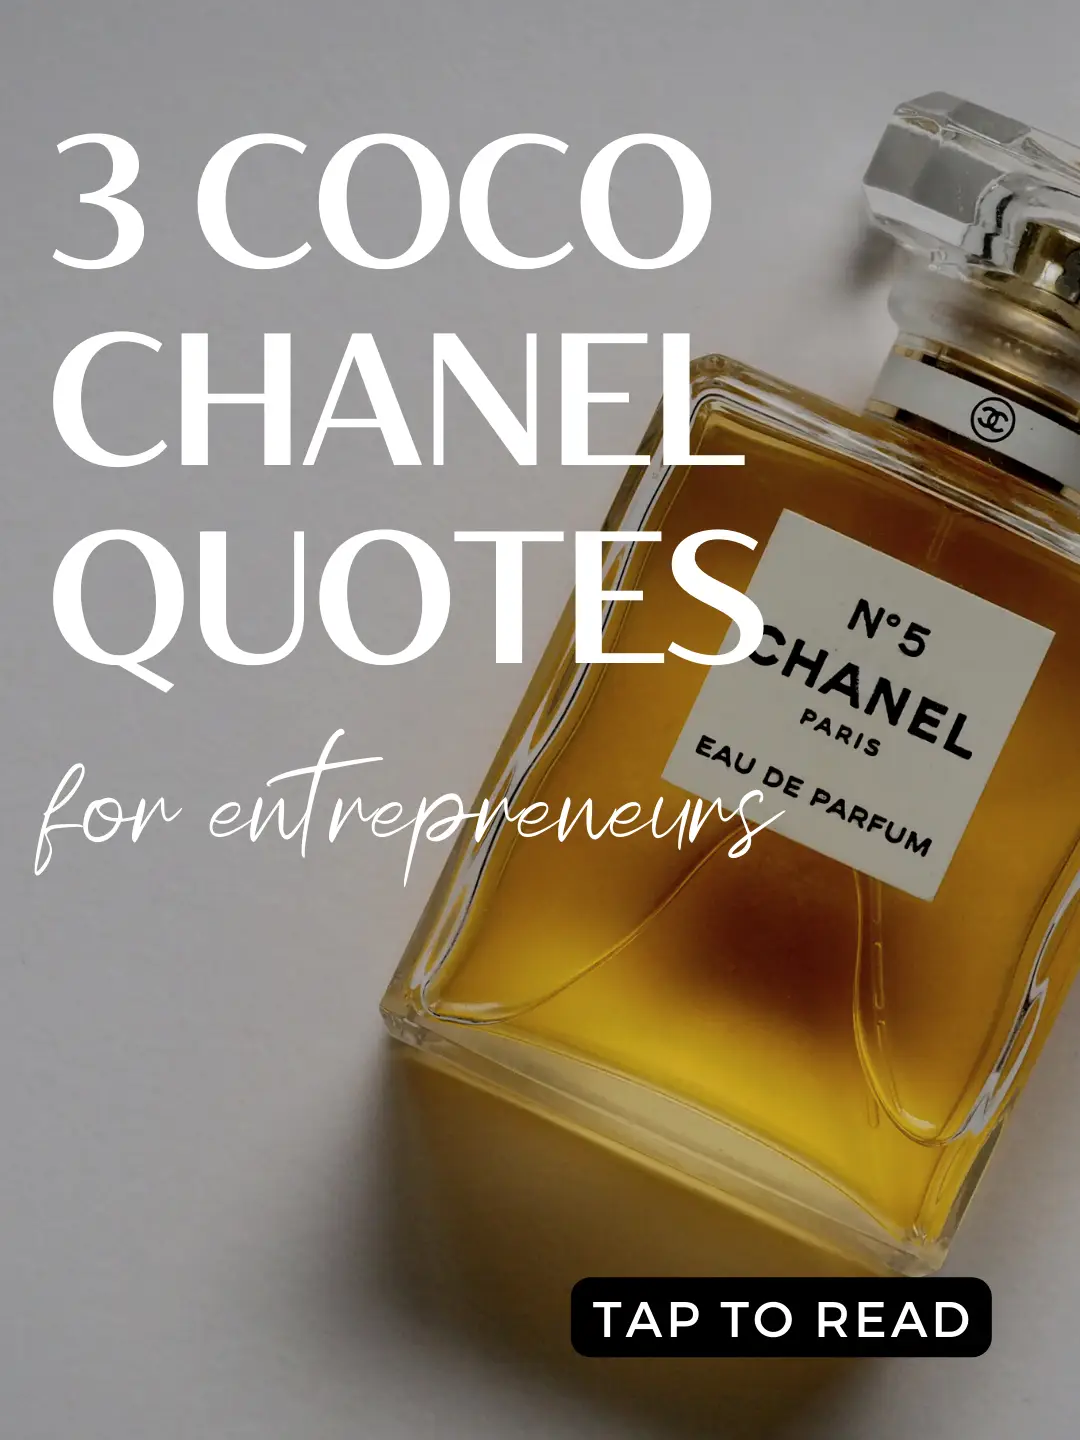 Coco Chanel Quote Inspirational Quotes Motivational Poster 